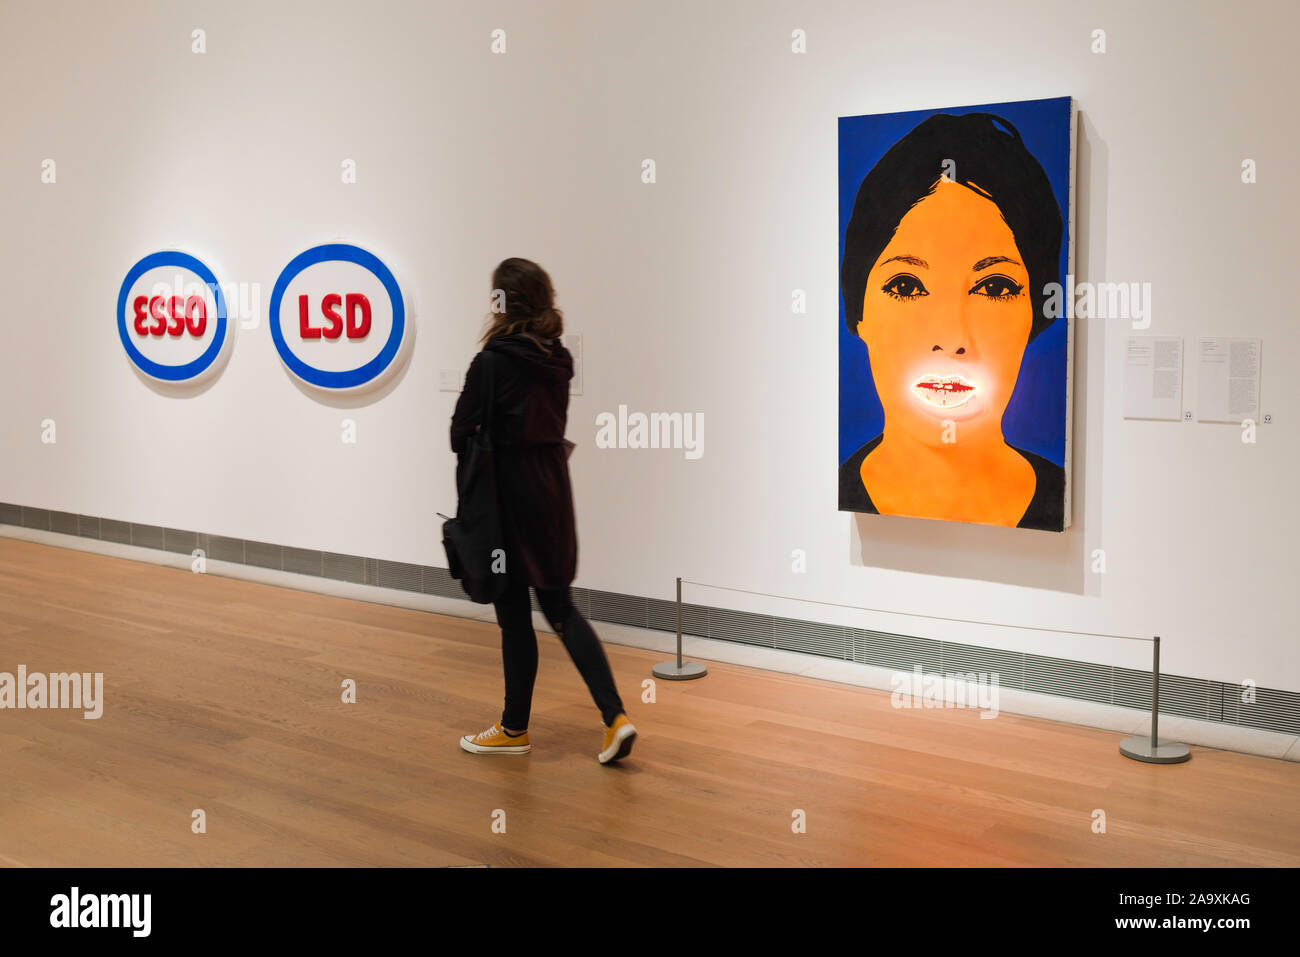 Woman art, a young woman walks past works by Elaine Sturtevant (High Voltage Painting) and Öyvind Fahlström (ESSO LSD), Moderna Museet, Stockholm. Stock Photo